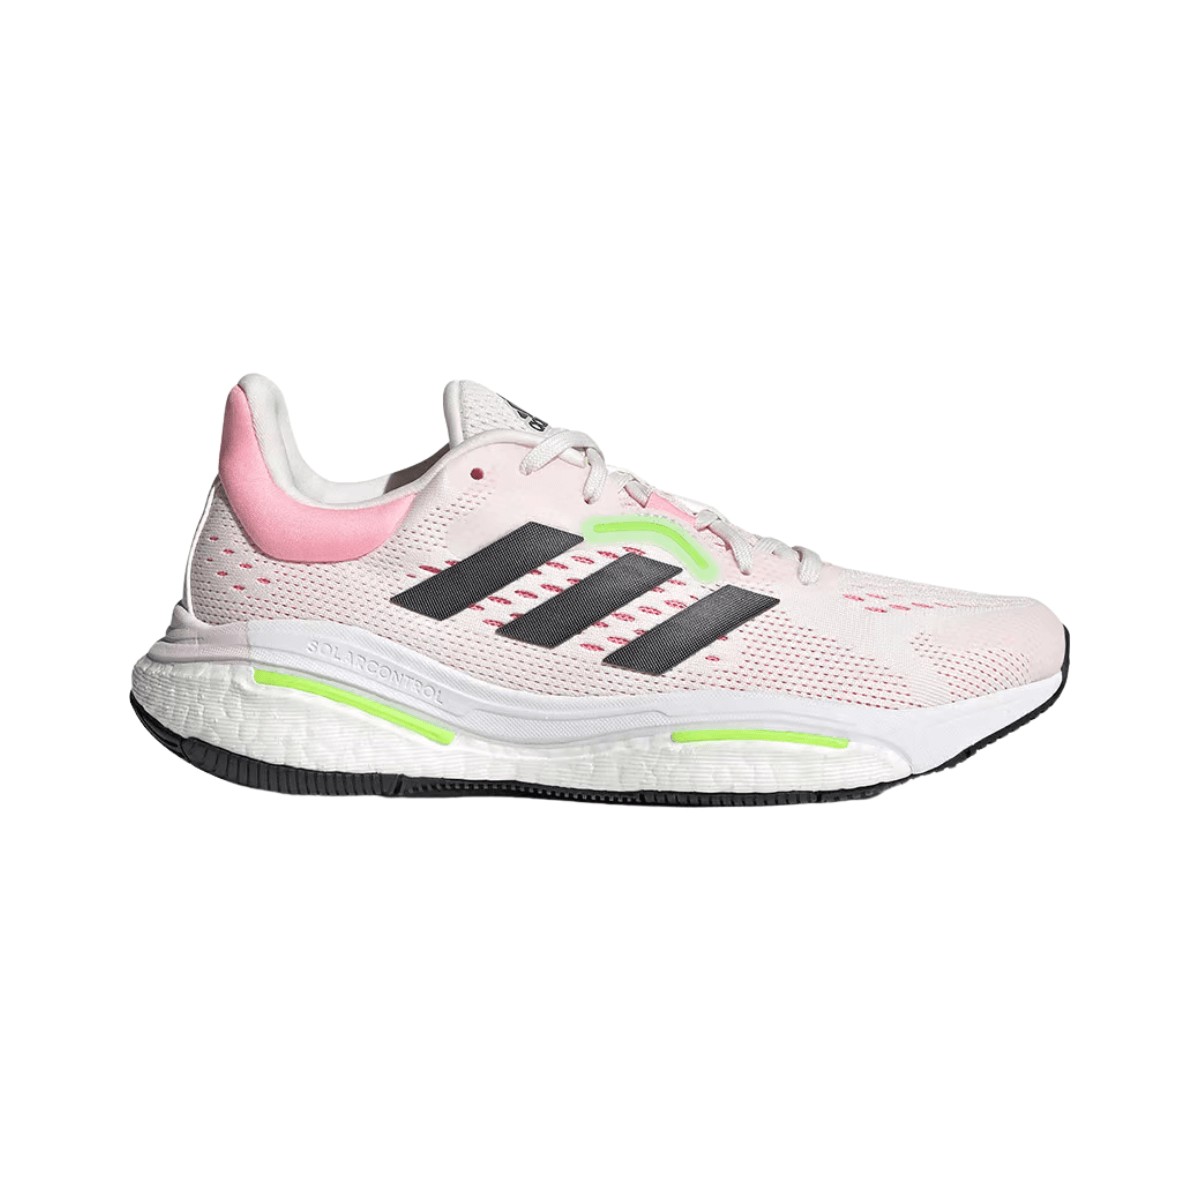 Chaussures Adidas Solar Control Rose Blanc Femme AW22, Taille UK 5